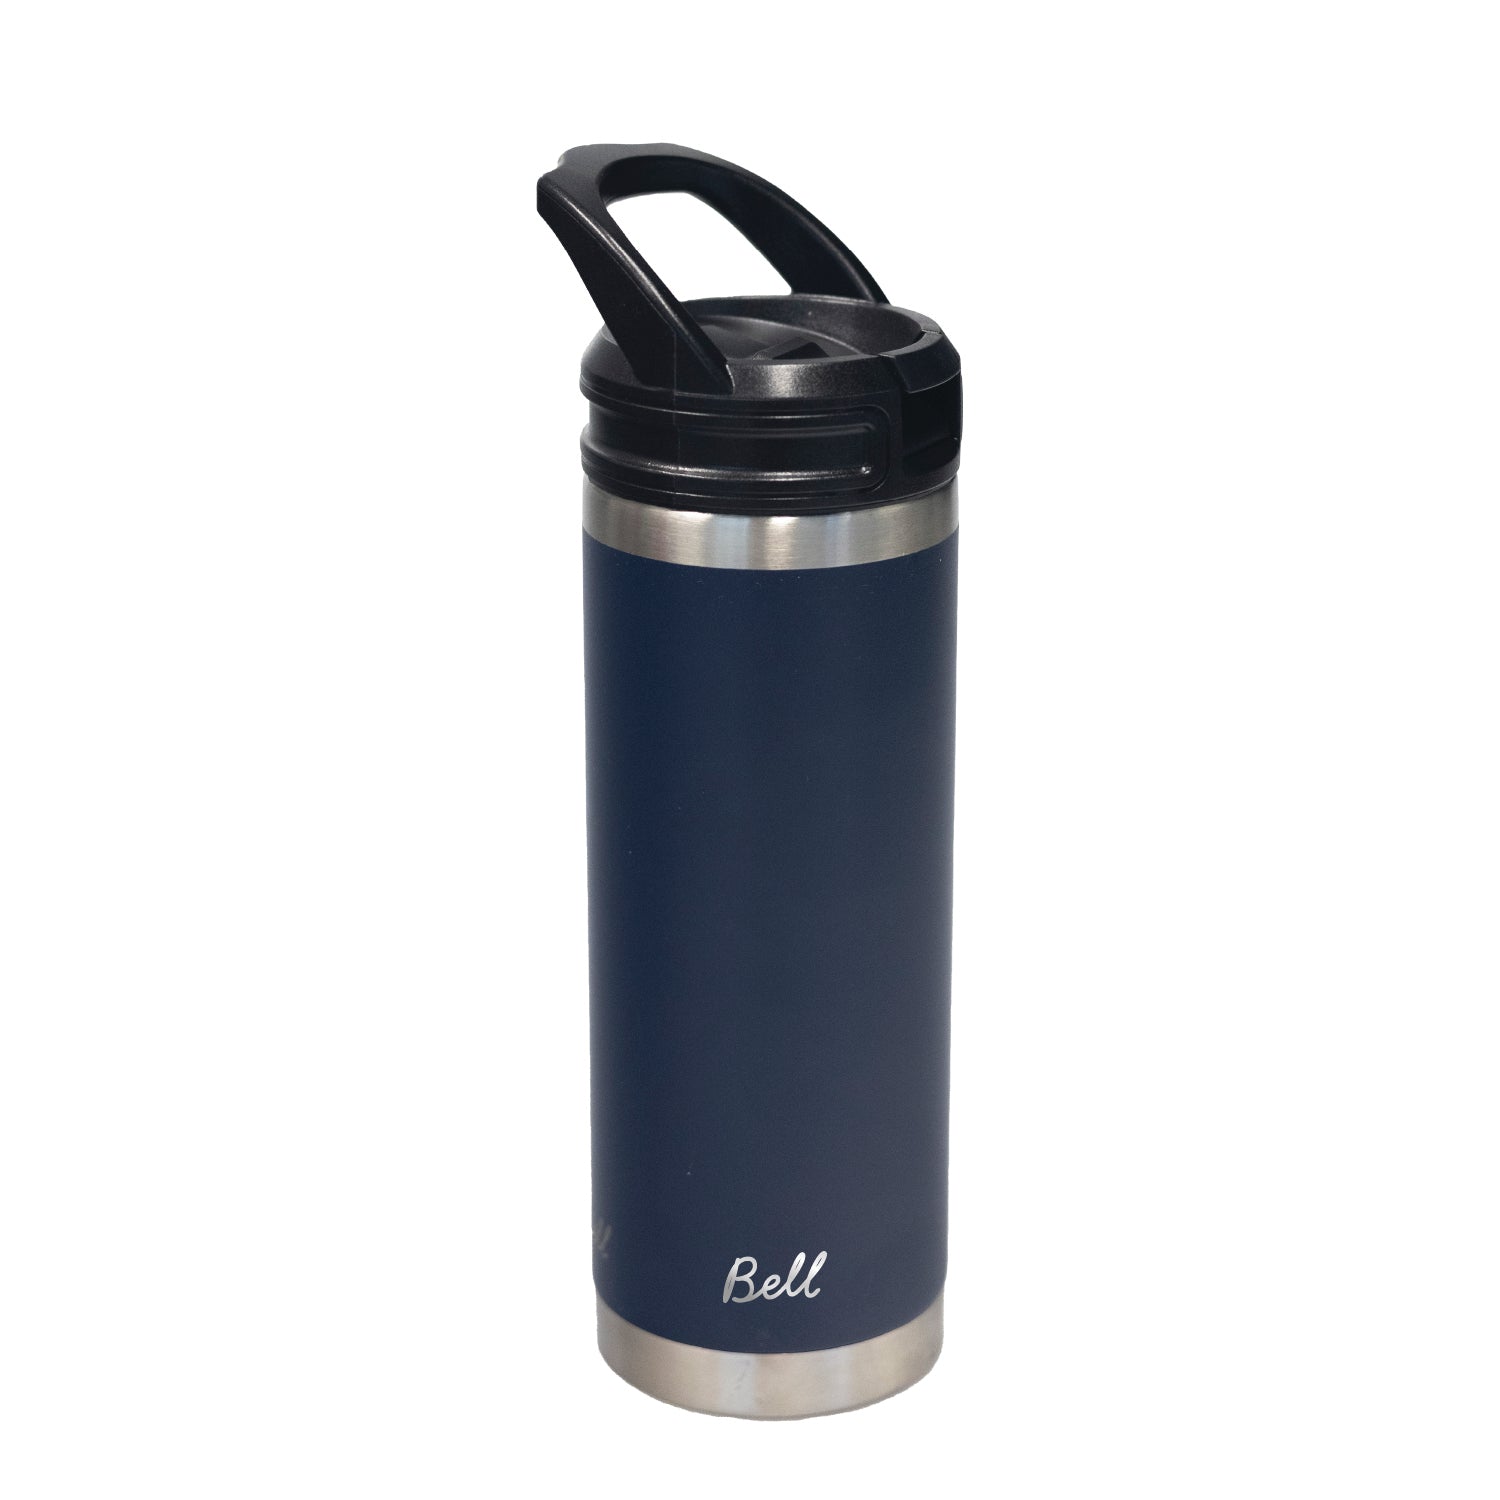 Bell Stainless Steel - Sipper lid and Handle - 532ml (18oz)